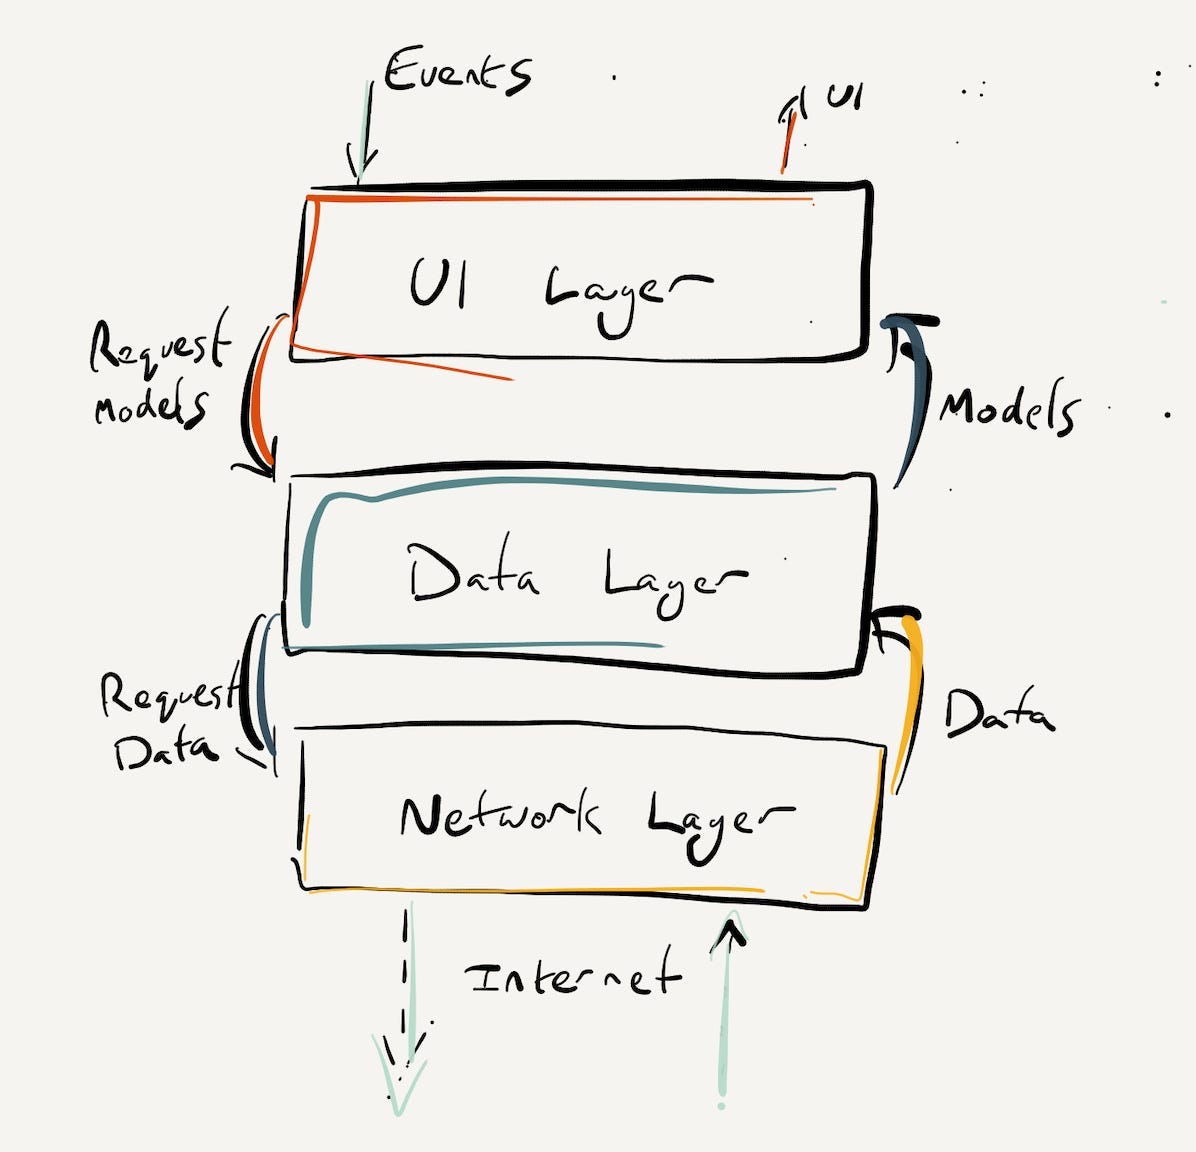 Super-basic architecture diagram of our sample app. If you look into the sample code, we also have a Domain module (which everything depends on), but that’s not important for the purposes of this article.